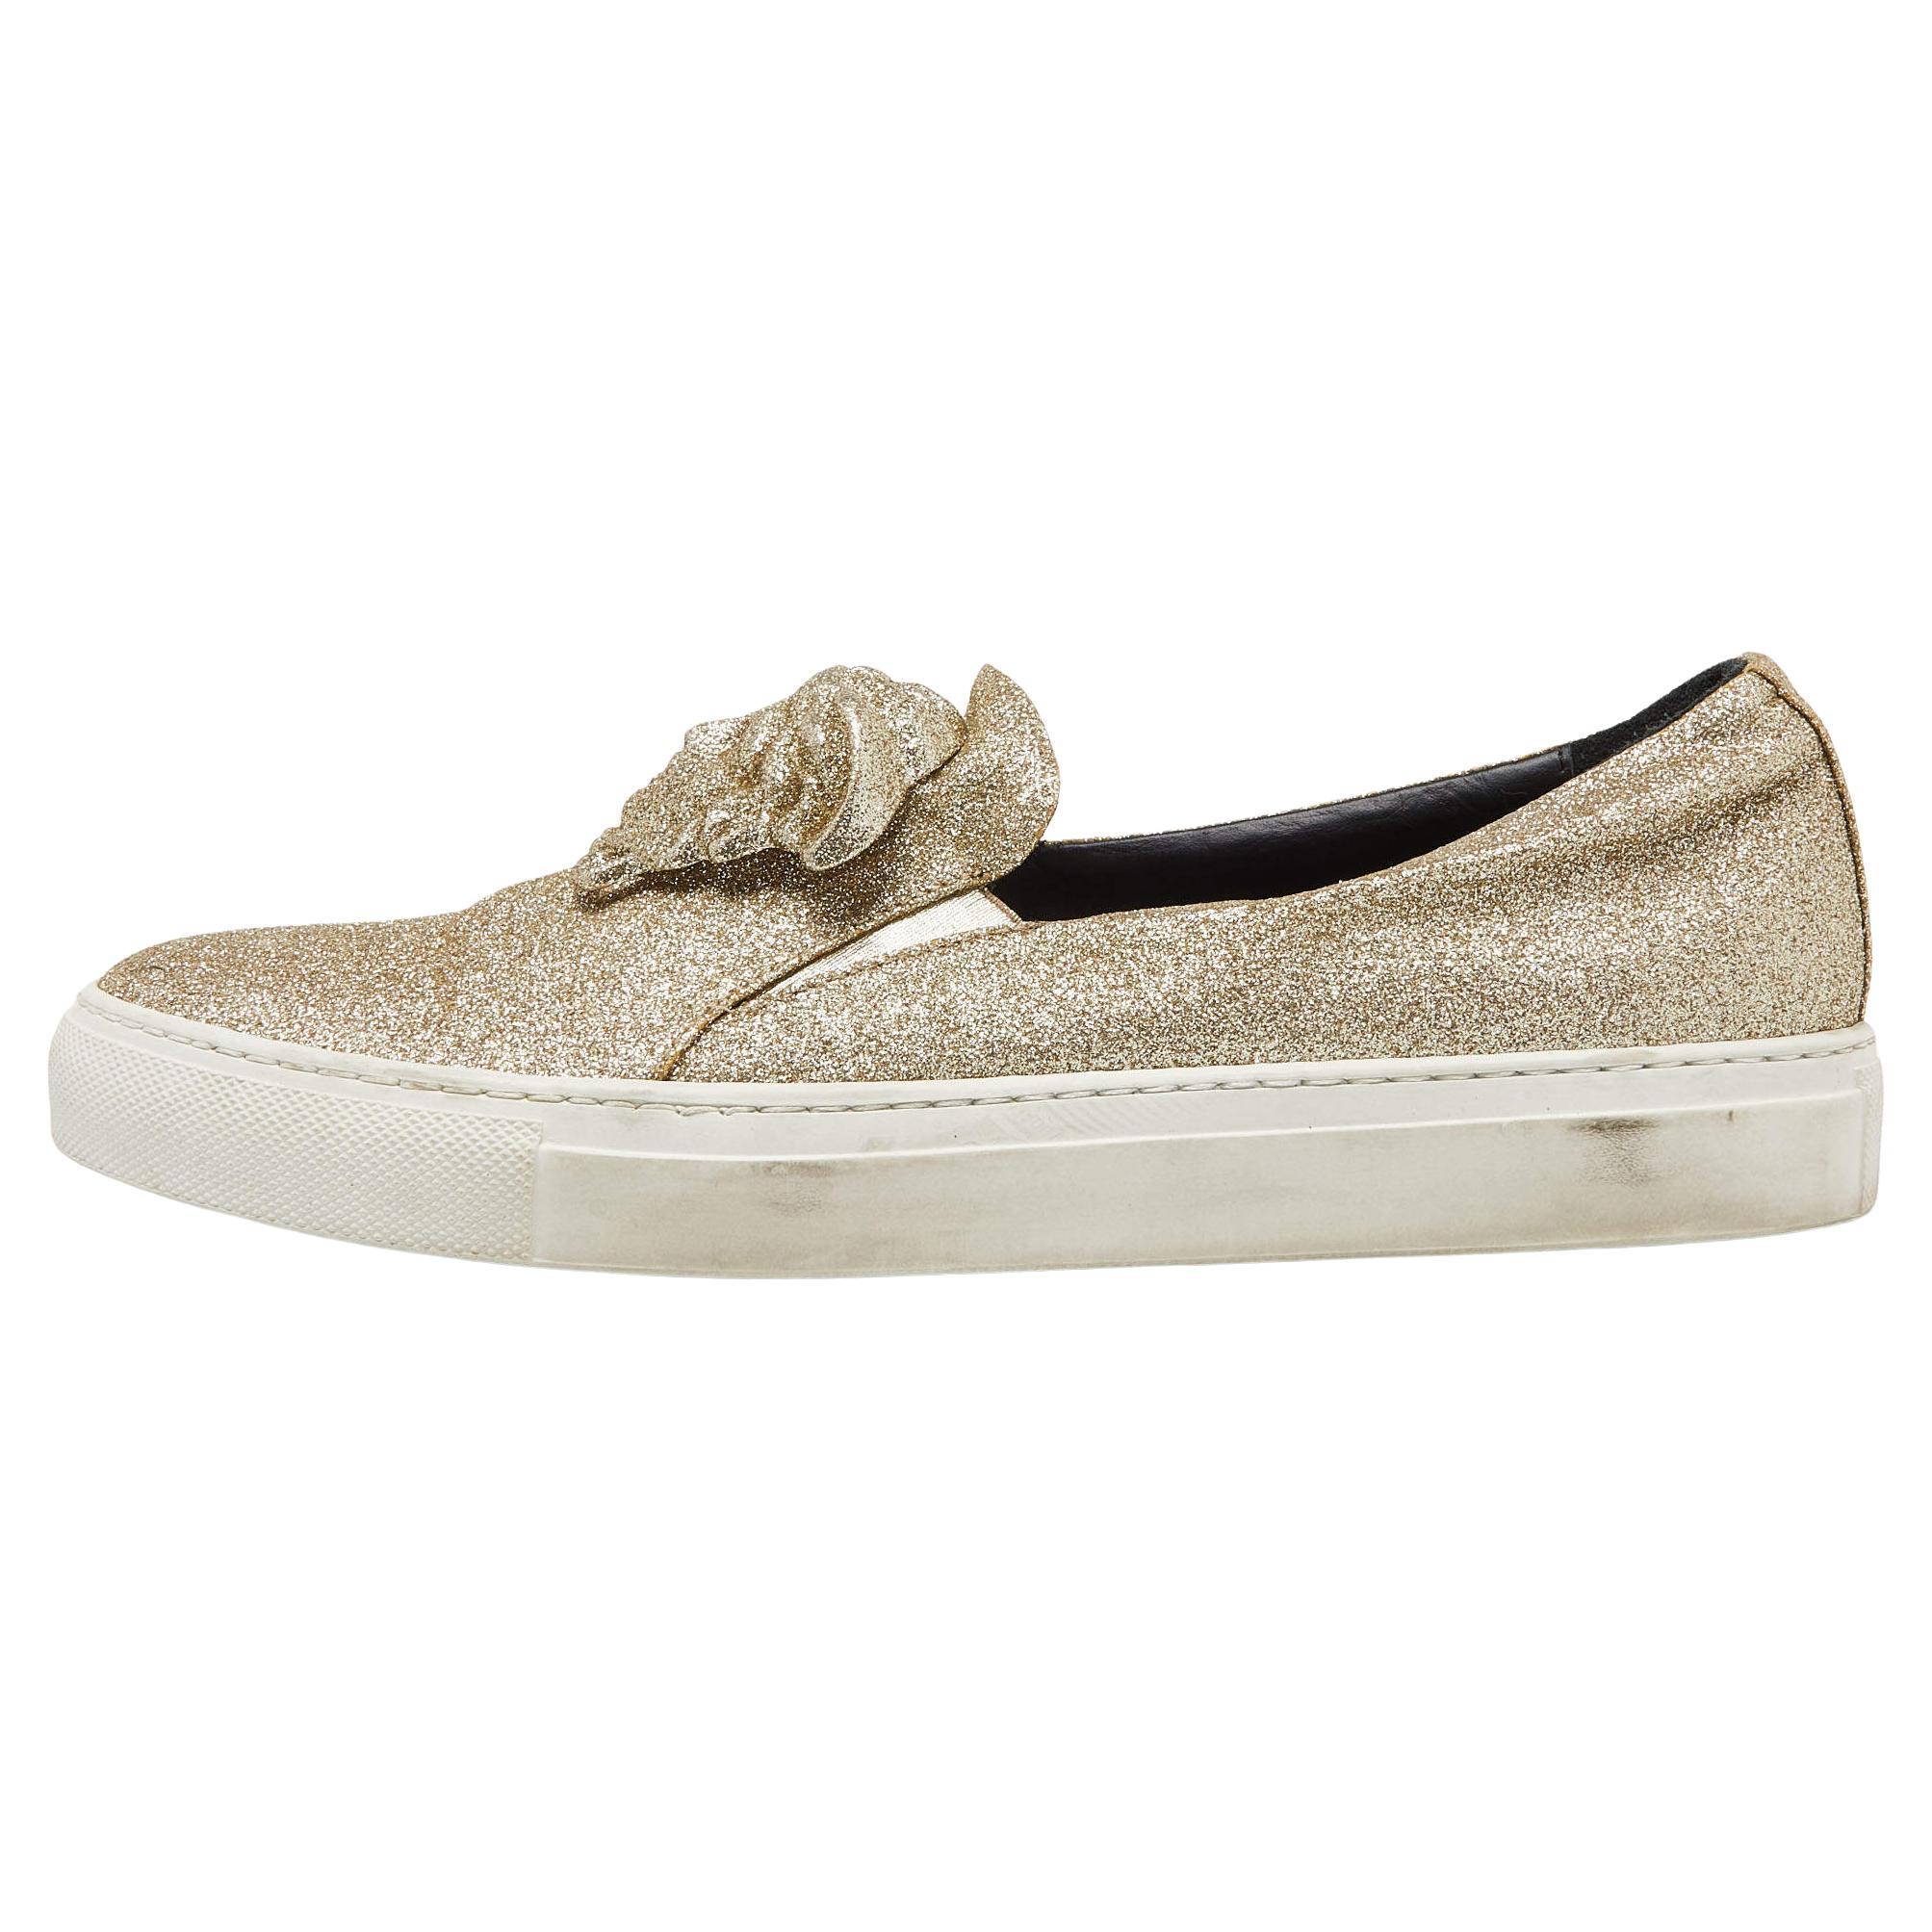 Versace Gold Glitter Palazzo Medusa Slip On Sneakers Size 41 For Sale